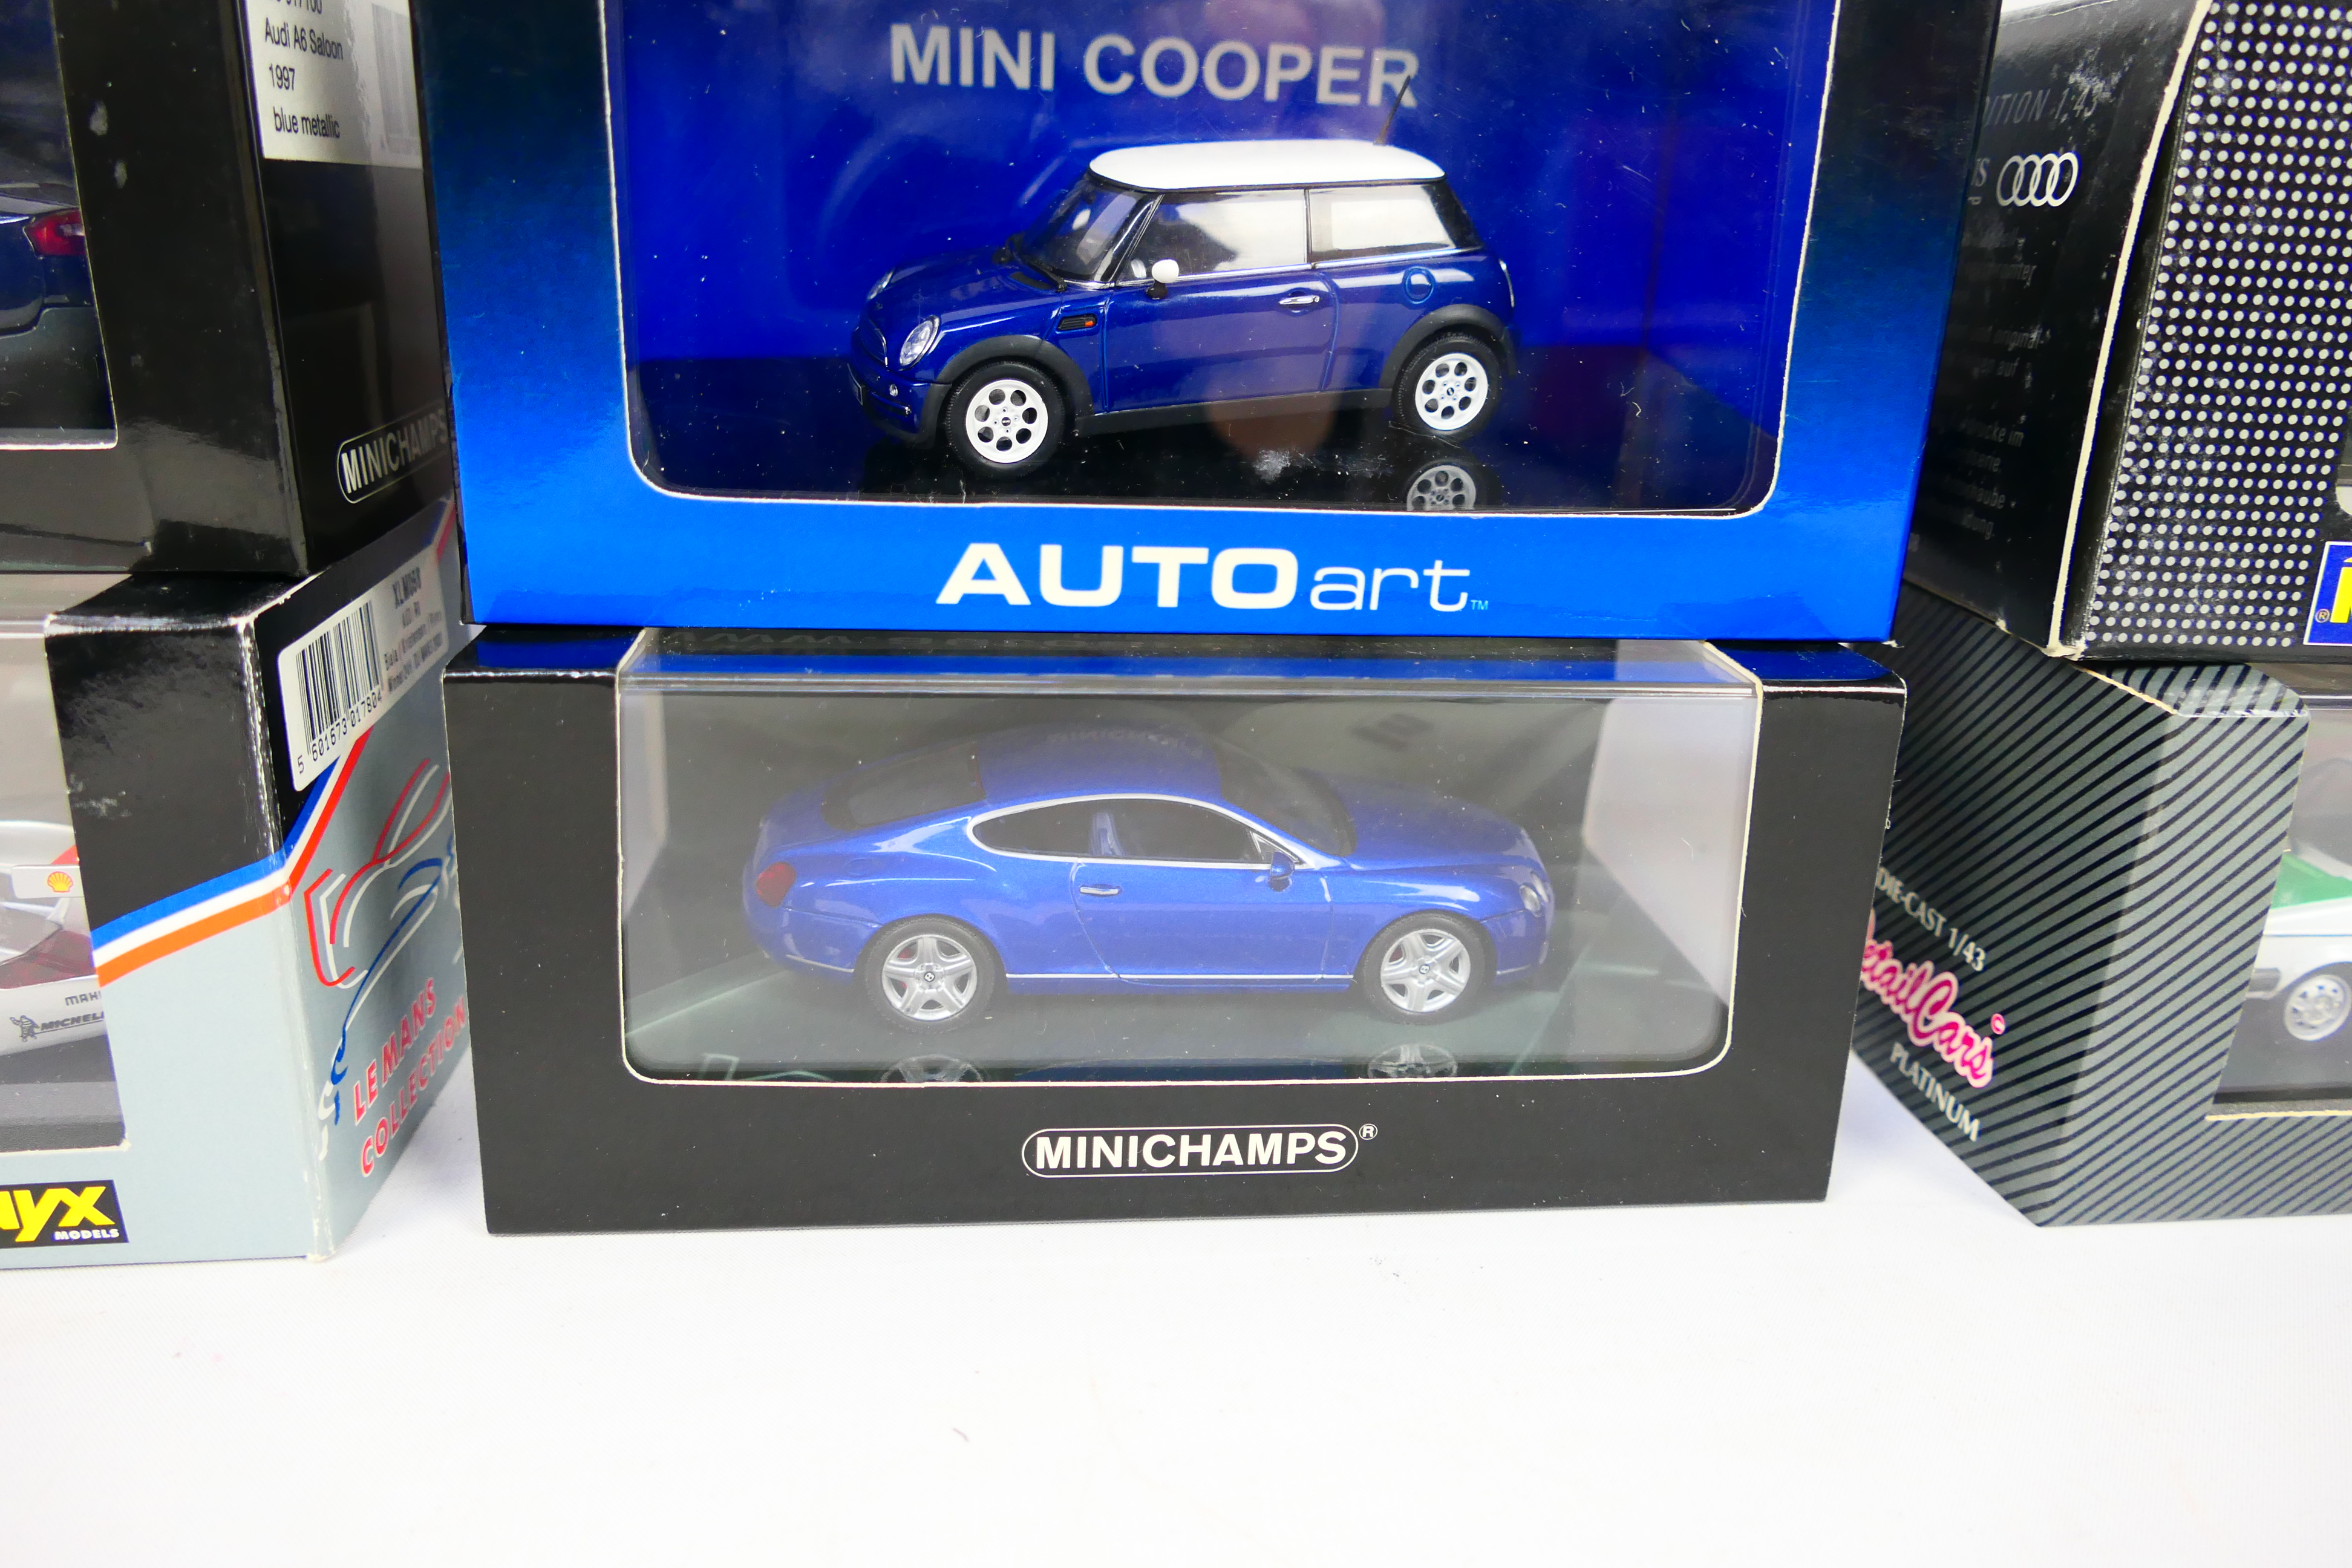 Minichamps - AutoArt - Revell - Detail Cars - Six boxed diecast 1:43 scale model vehicles. - Image 6 of 10